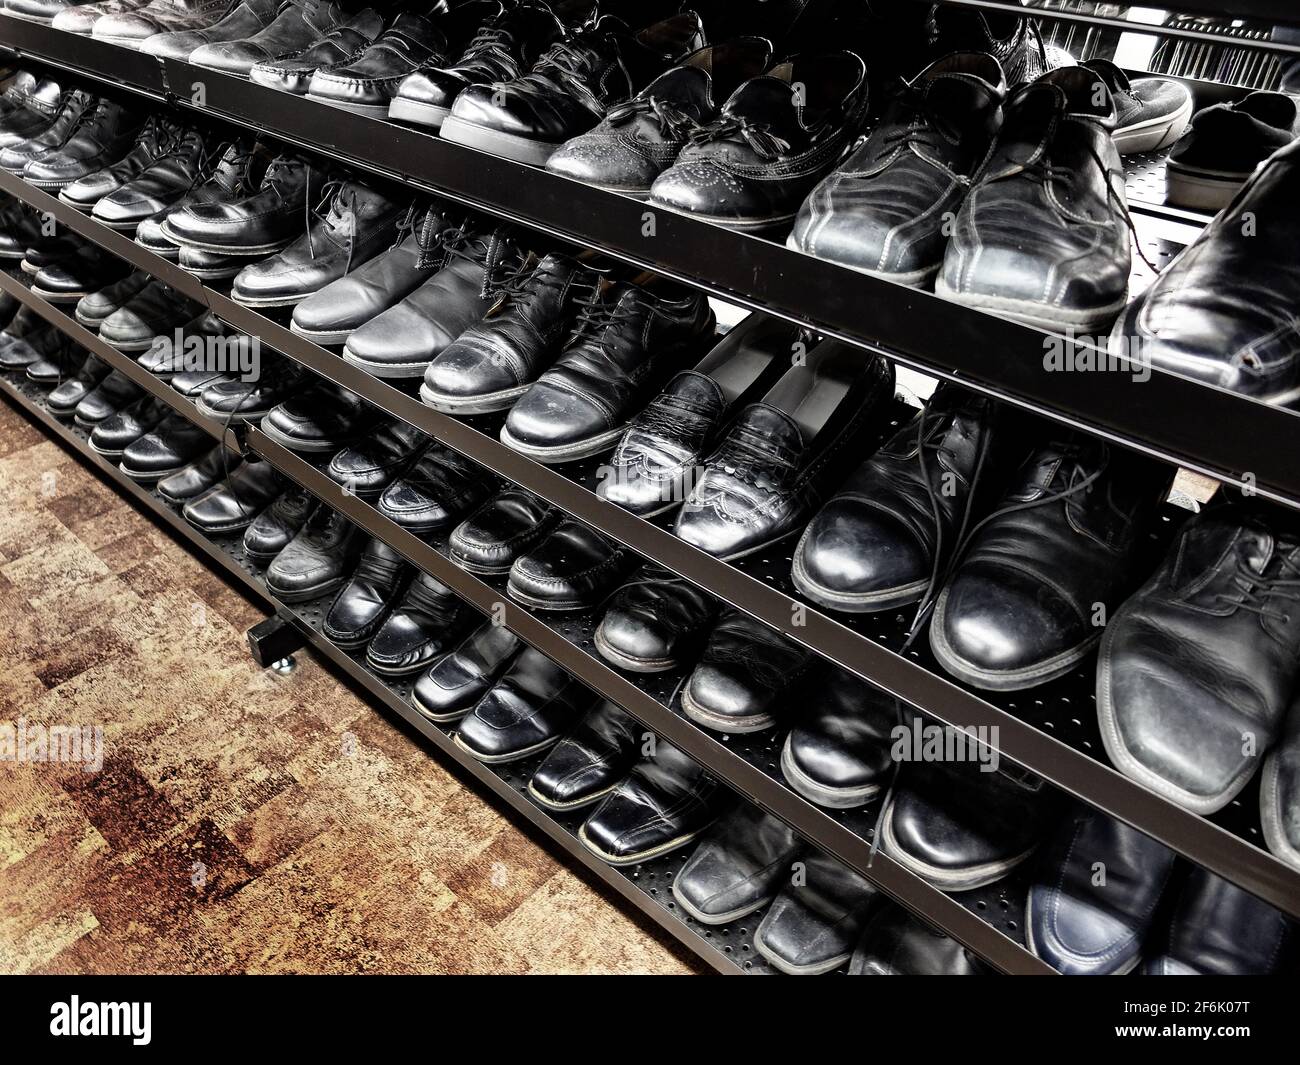 Rows of old mens men's dress shoes at thrift store on sale Stock Photo